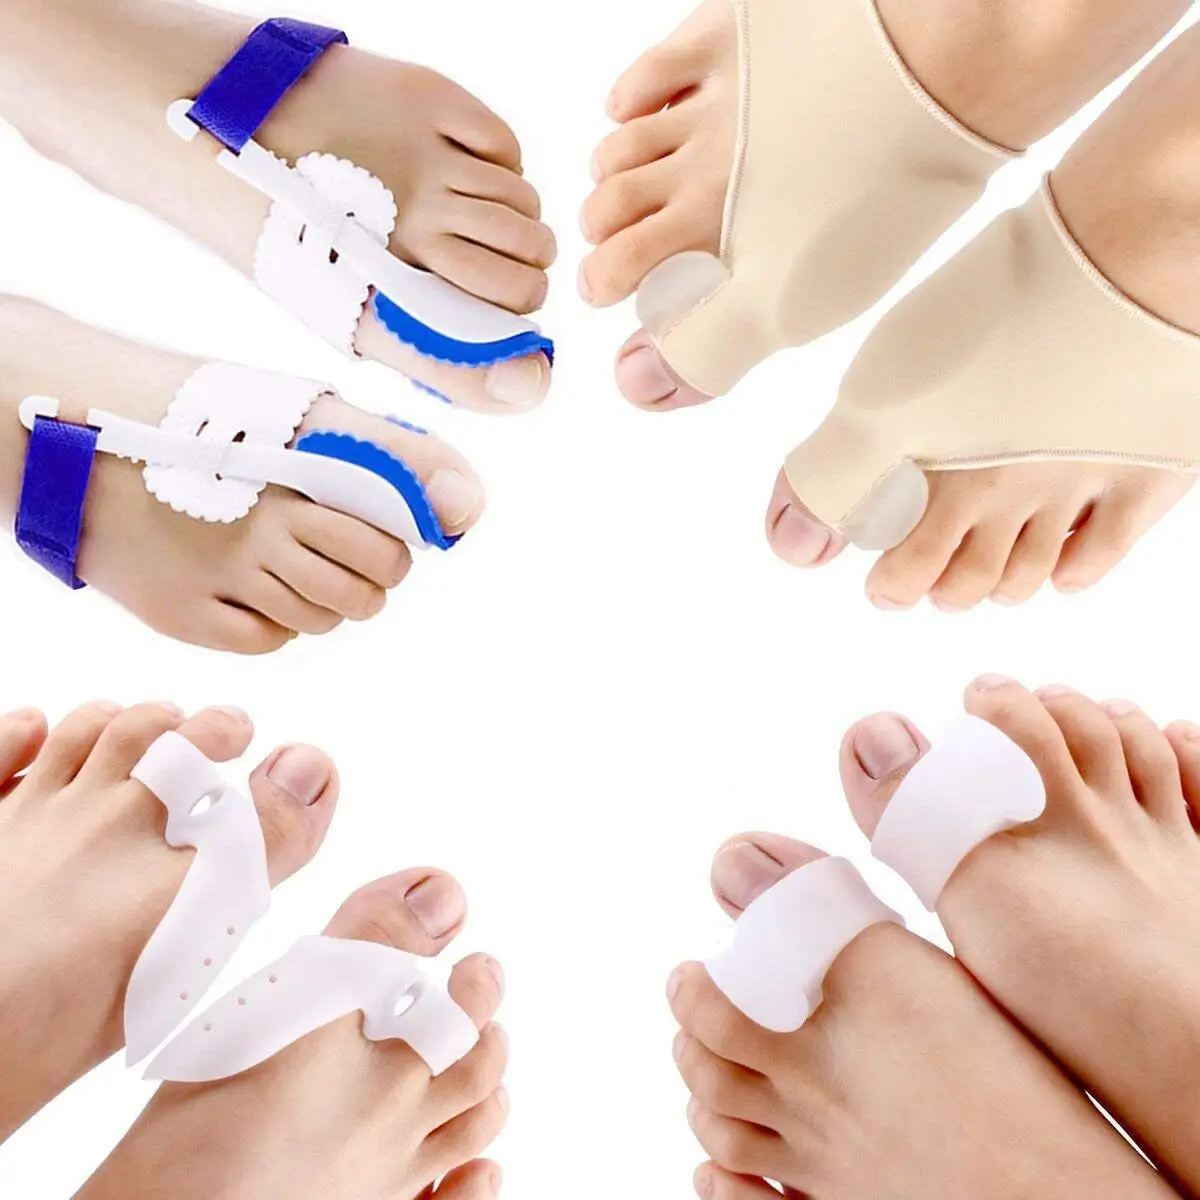 

Bunion Corrector and Bunion Relief Kit - Cure Pain in Big Toe Joint,Tailors Bunion, Hallux Valgus,Hammer Toe, Toe Separators